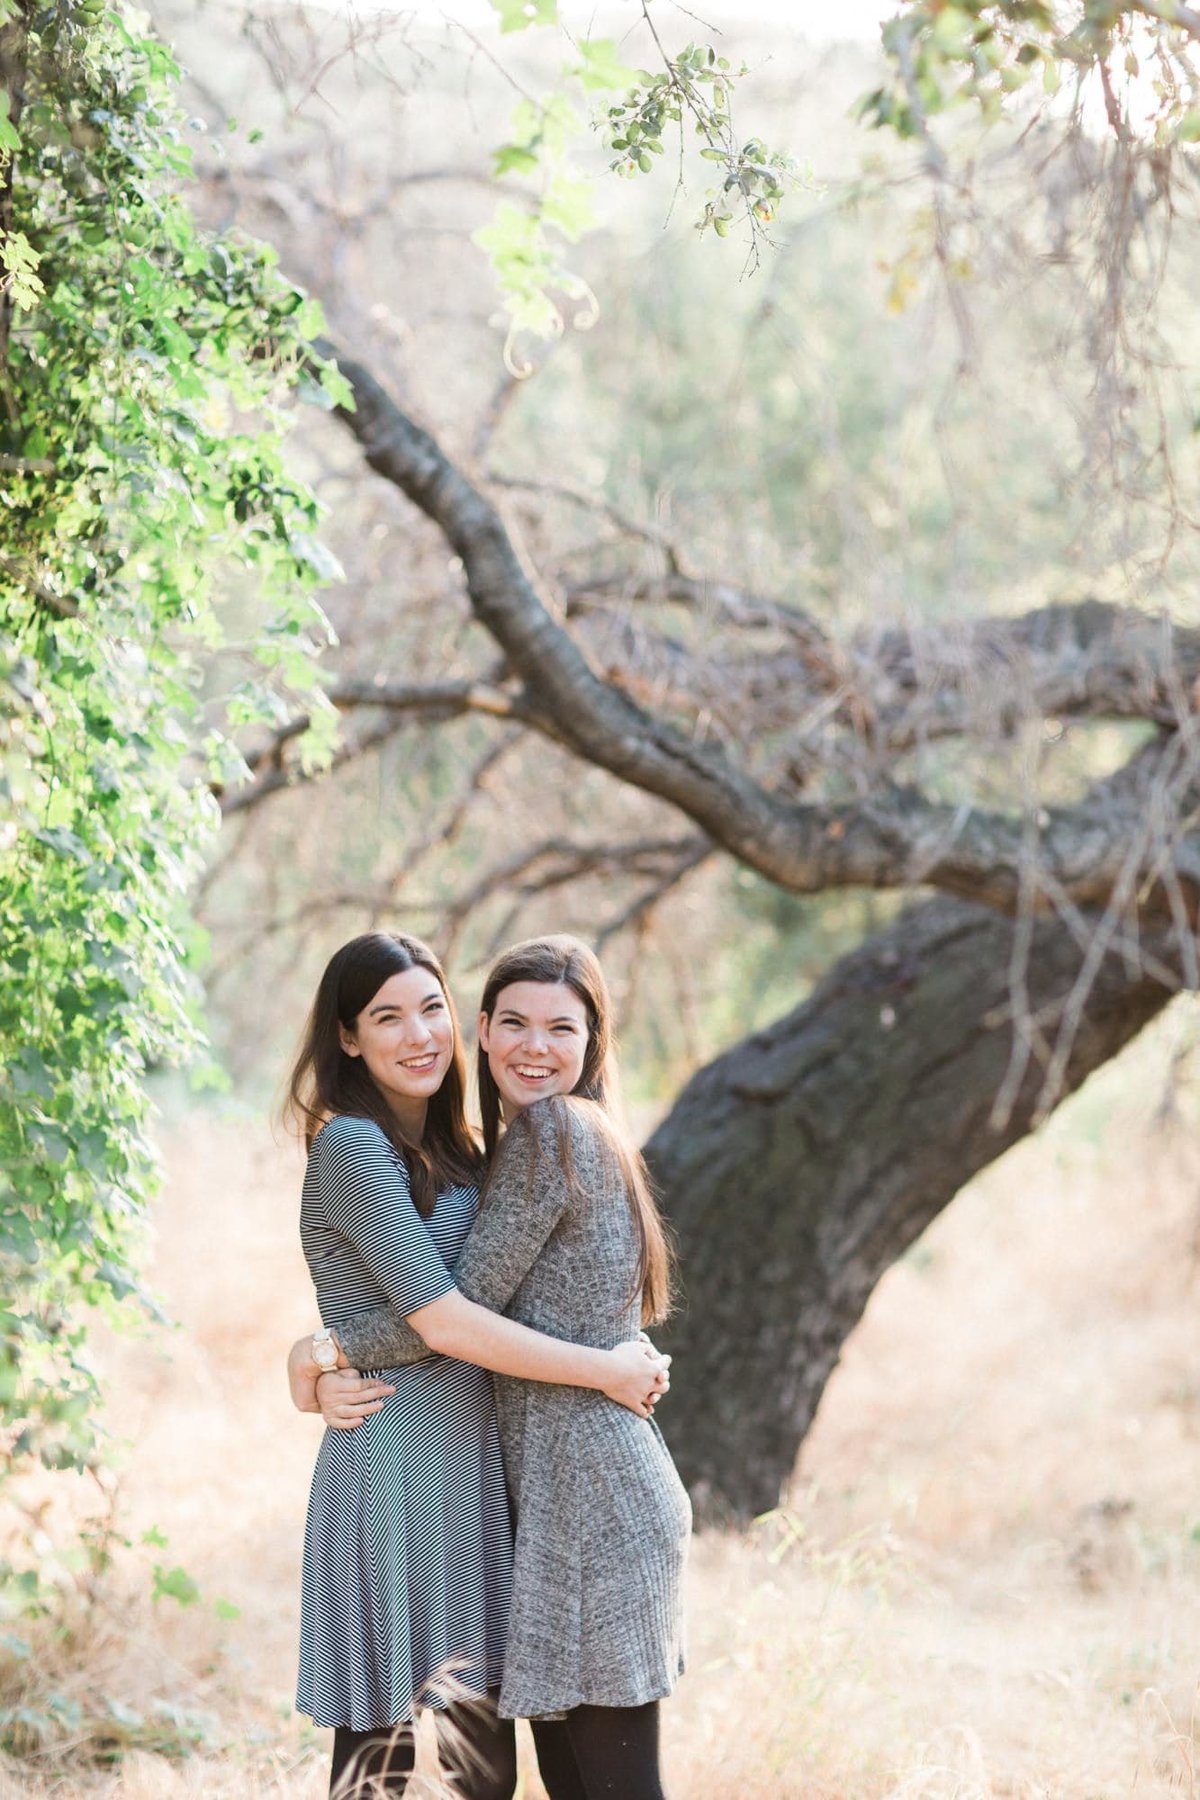 Two sisters hug it out during family photo session in a park in front of a large tree